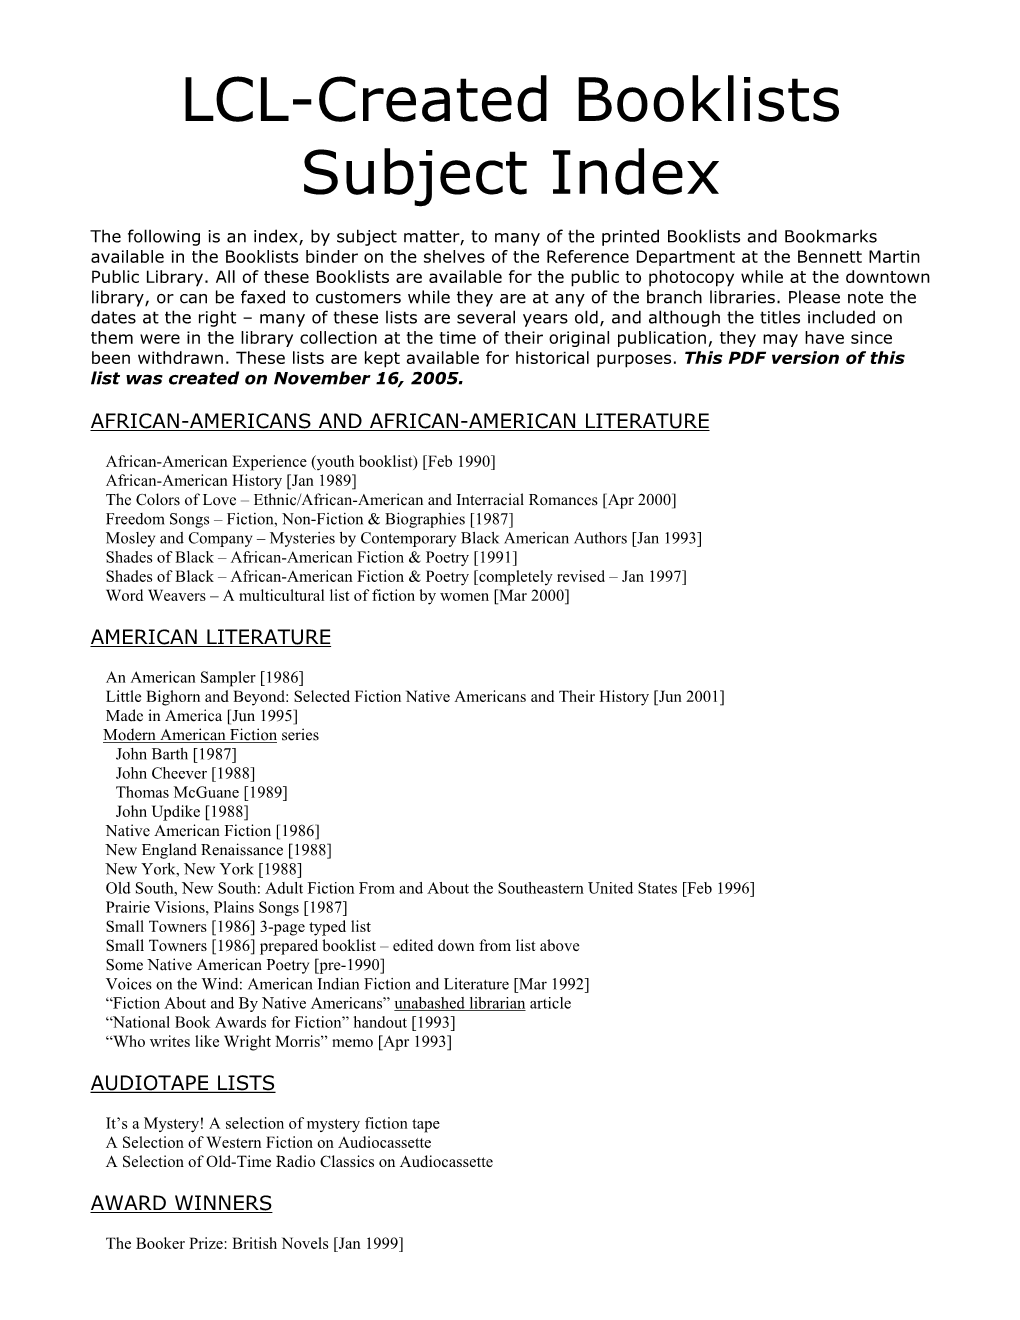 LCL Booklist Subject Index